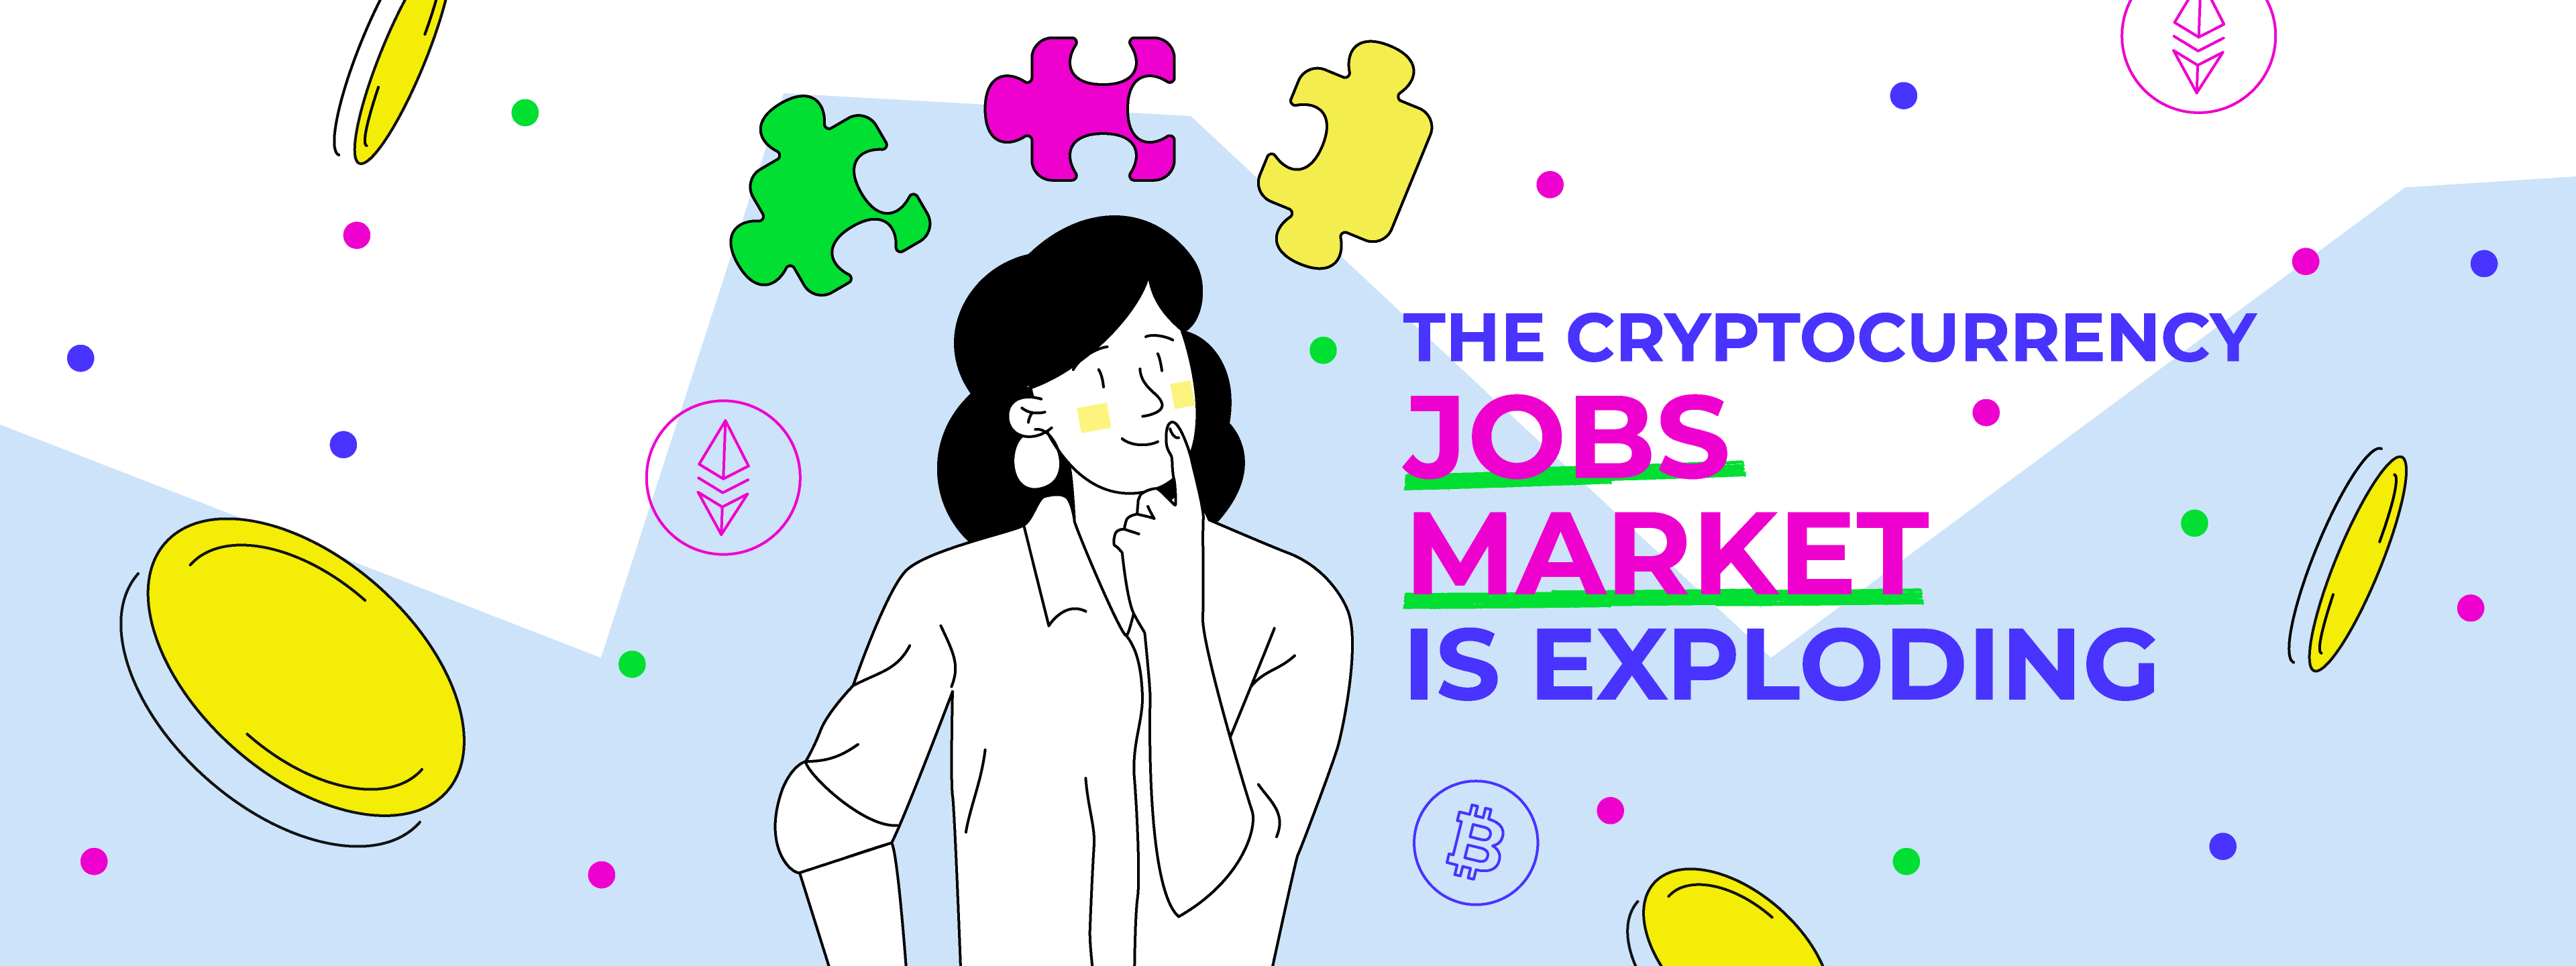 The Cryptocurrency Jobs Market Is Exploding